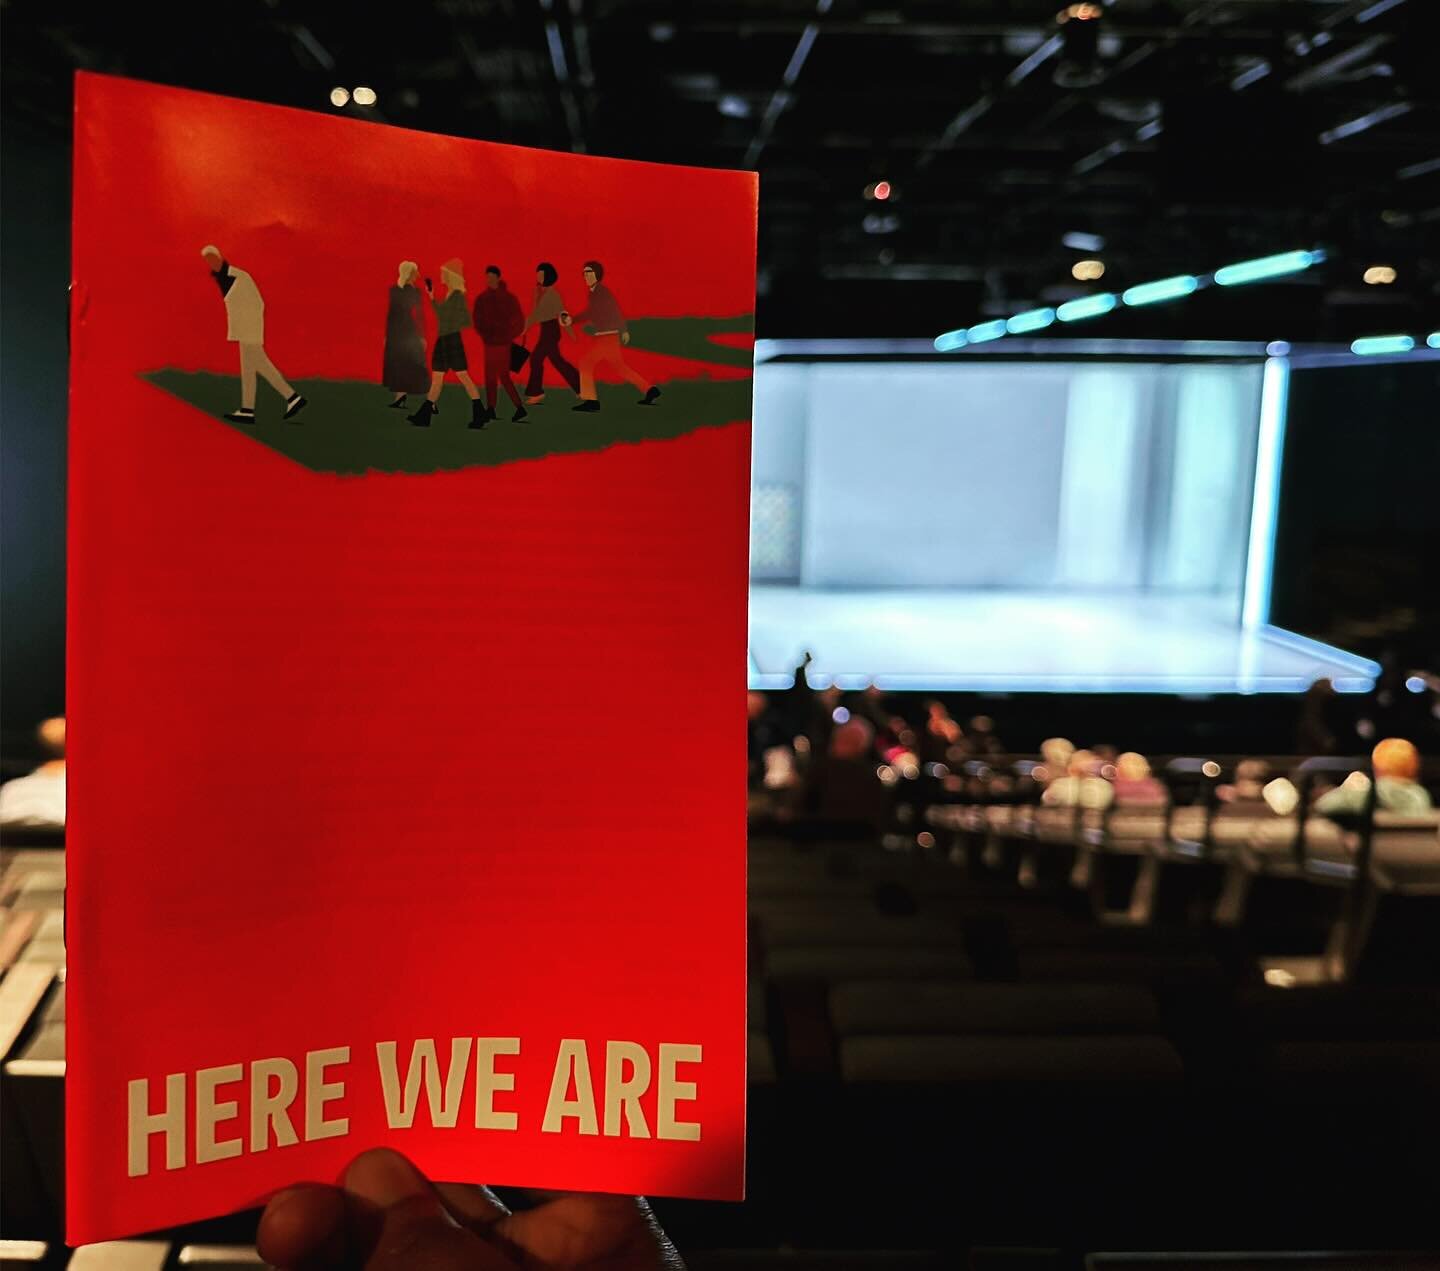 Will we ever slow down? Well&hellip; @herewearemusical @theshedny for Today&rsquo;s Experience.